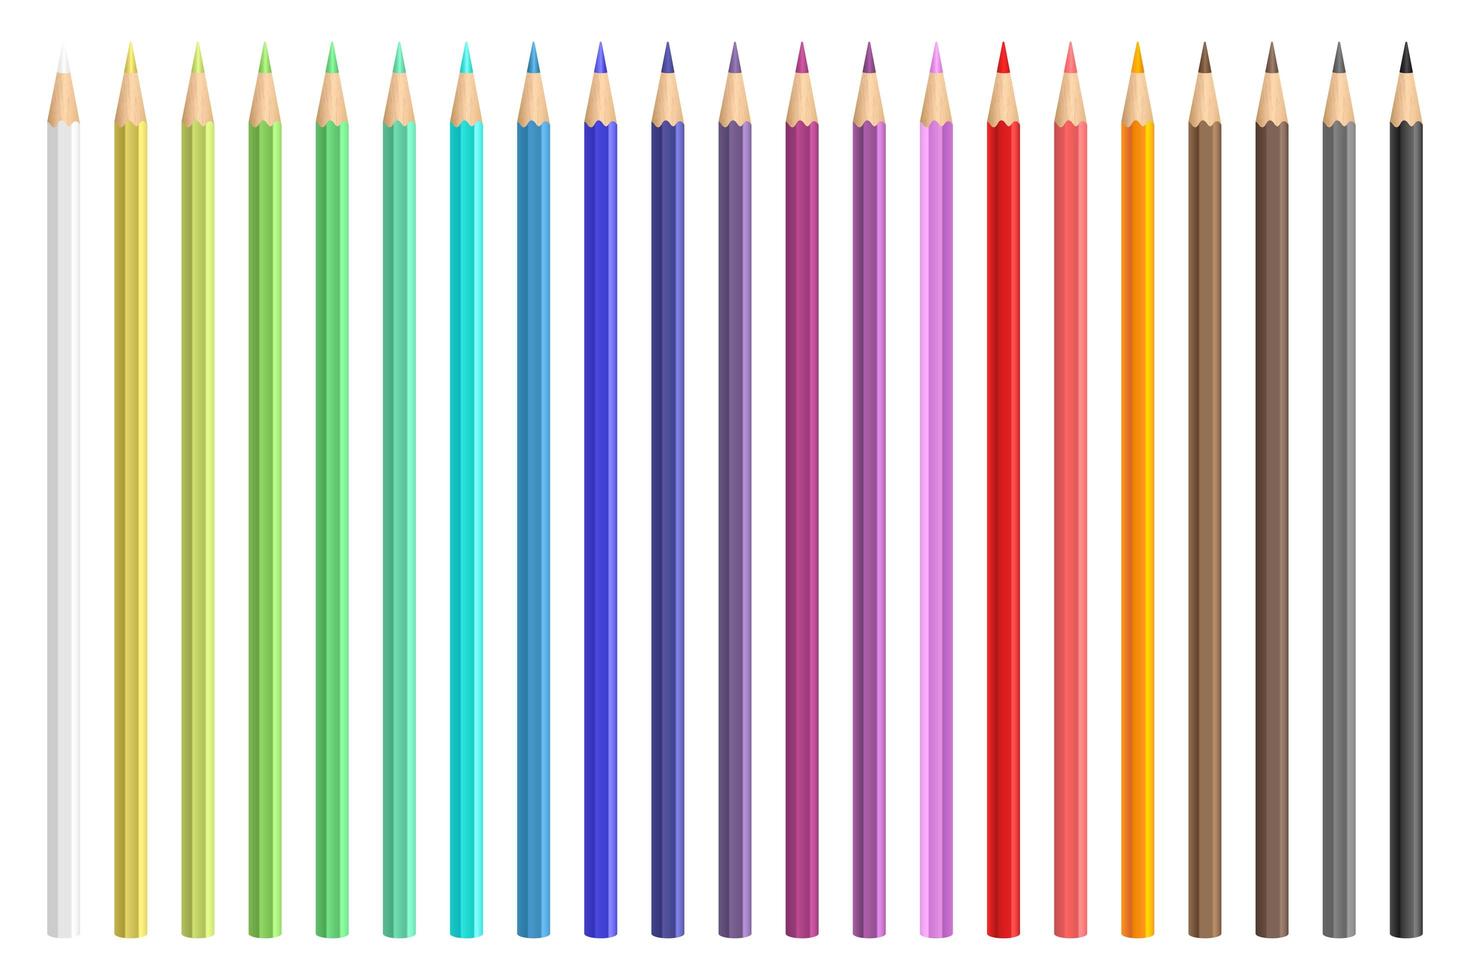 Colored pencils vector design illustraion isolated on white background